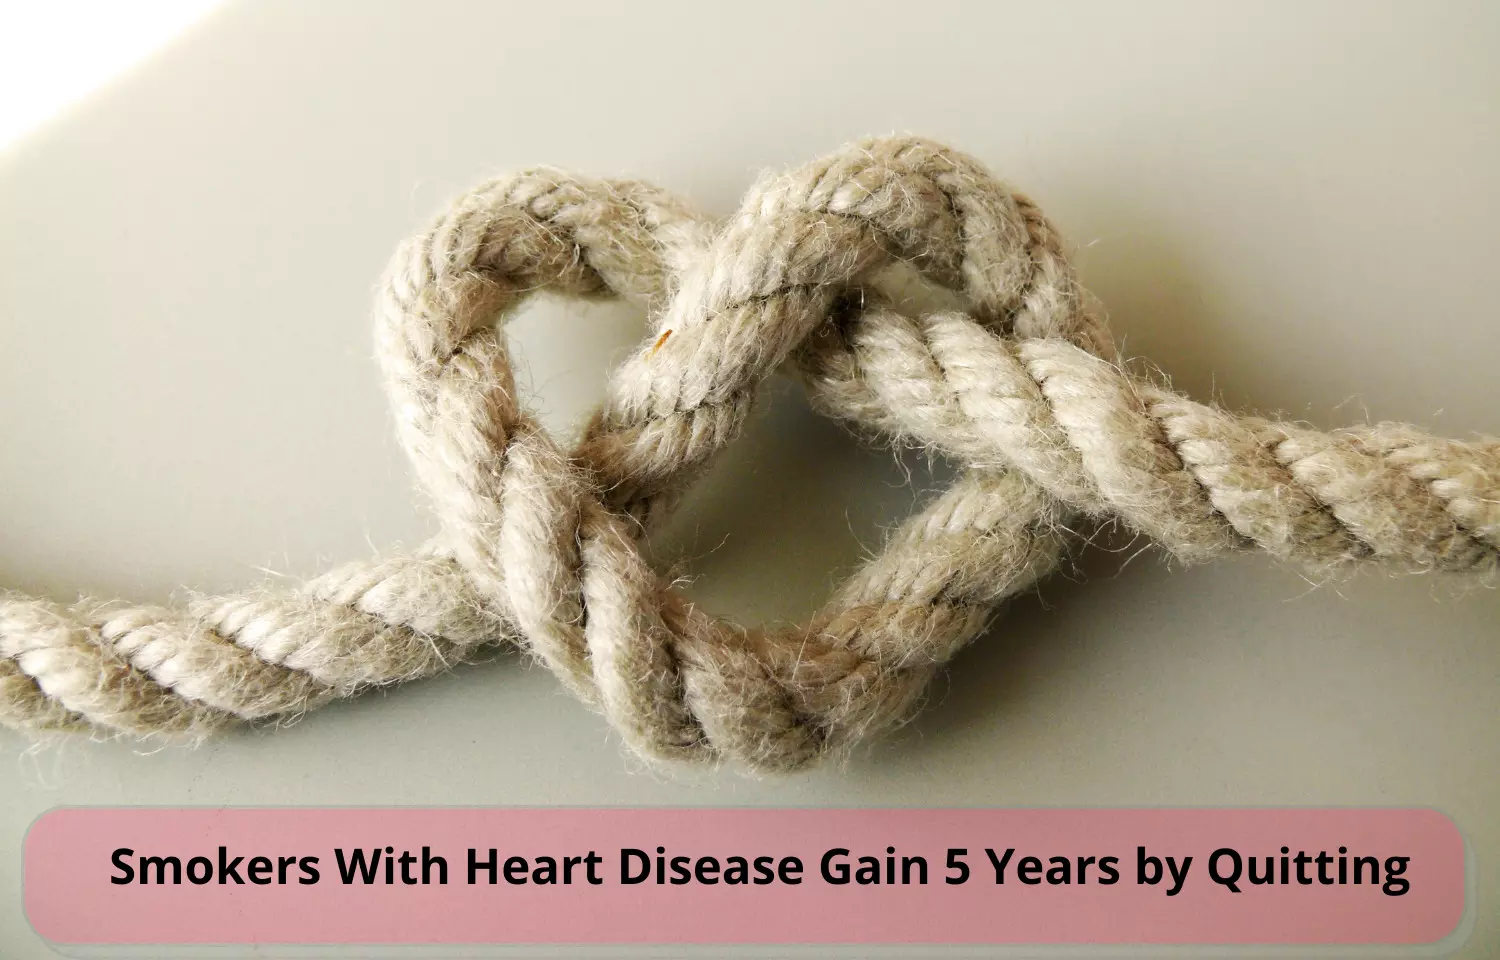 Journal Club - Smokers With Heart Disease can add up 5 Years by Quitting